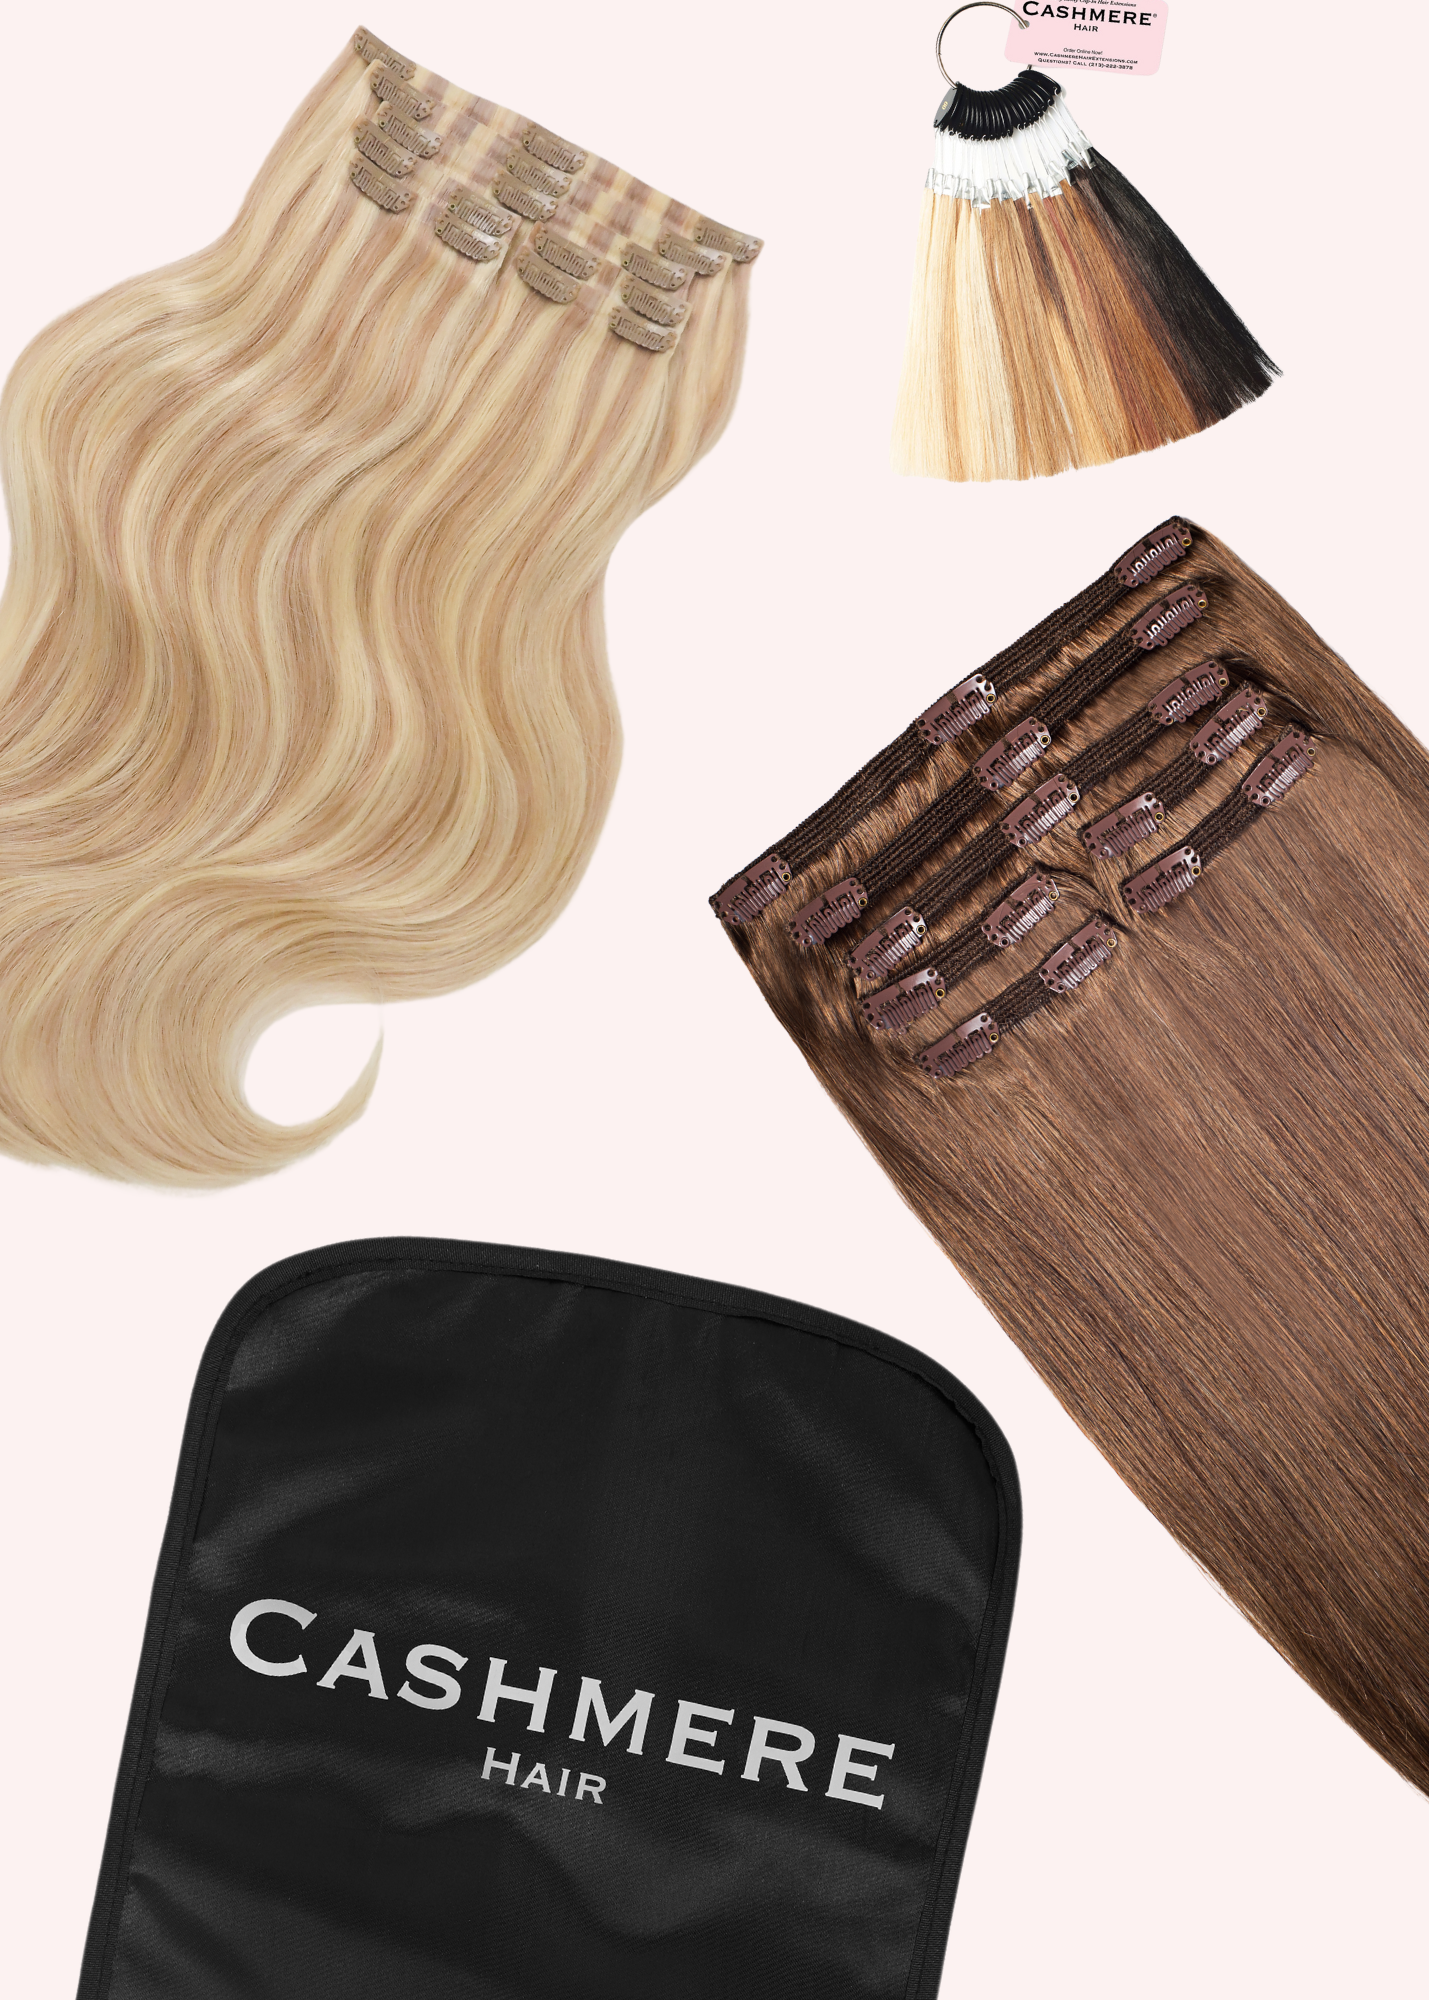 cashmere hair seamless, classic clip-ins, a color ring and travel bag